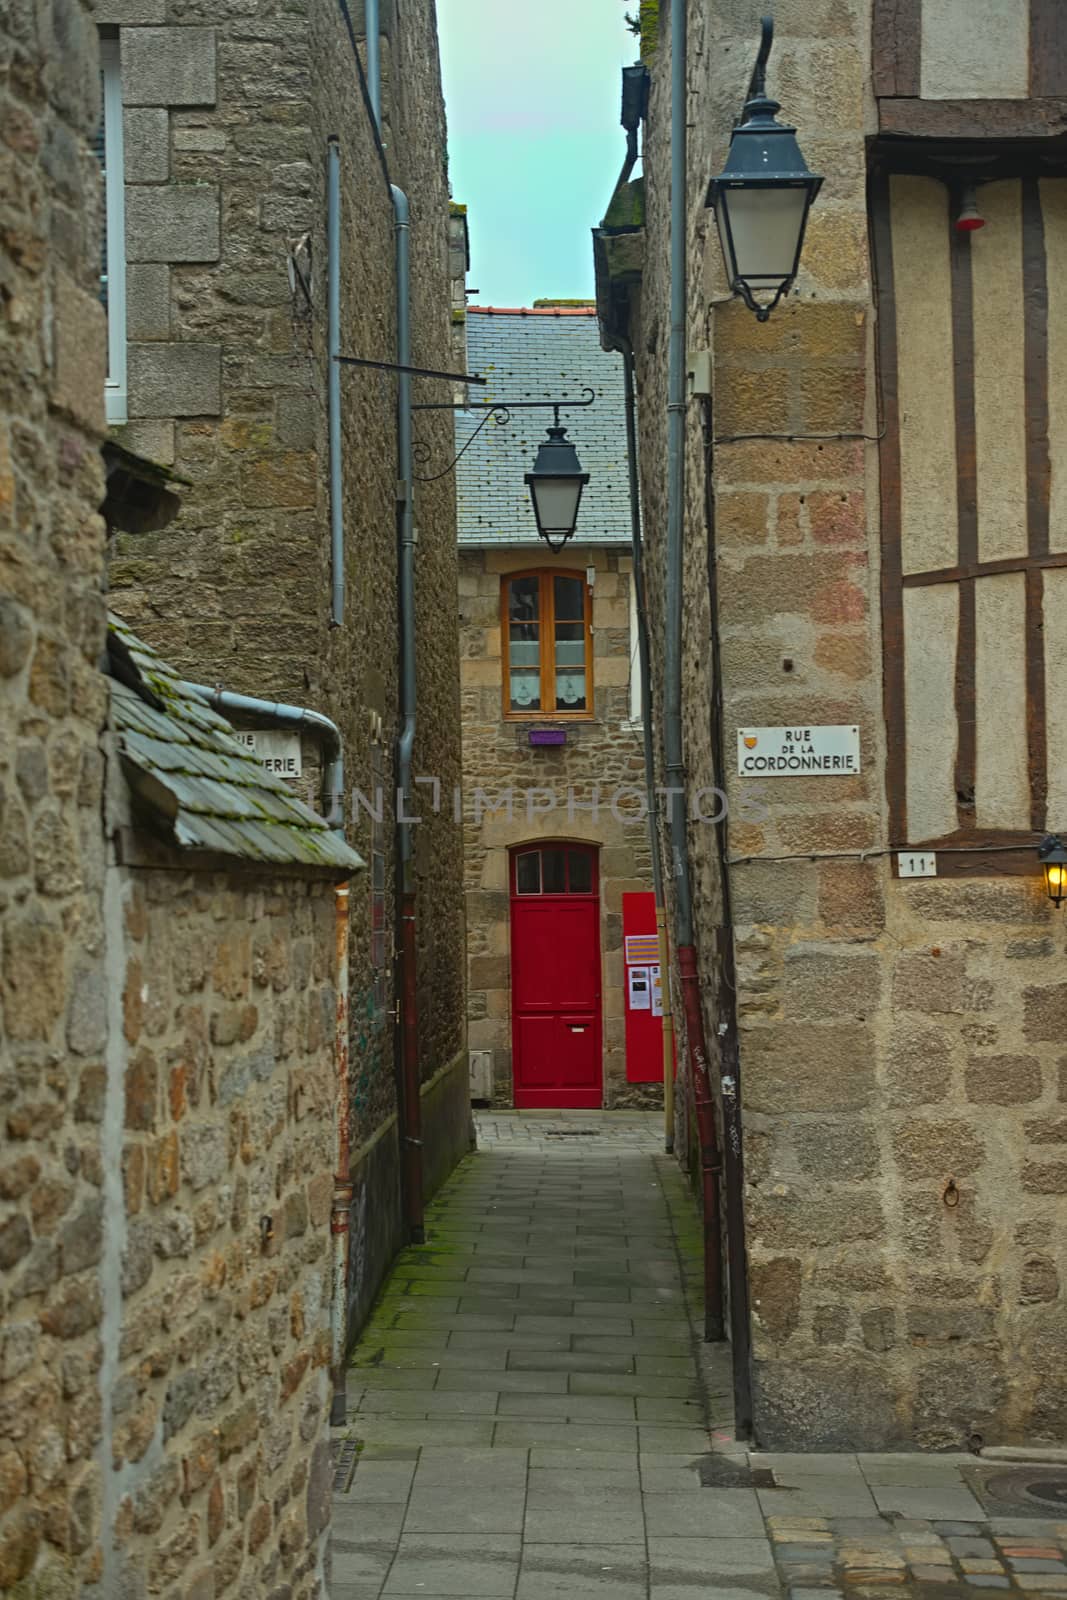 Narrow passage between two traditional stone buildings with red entrance door ahead by sheriffkule